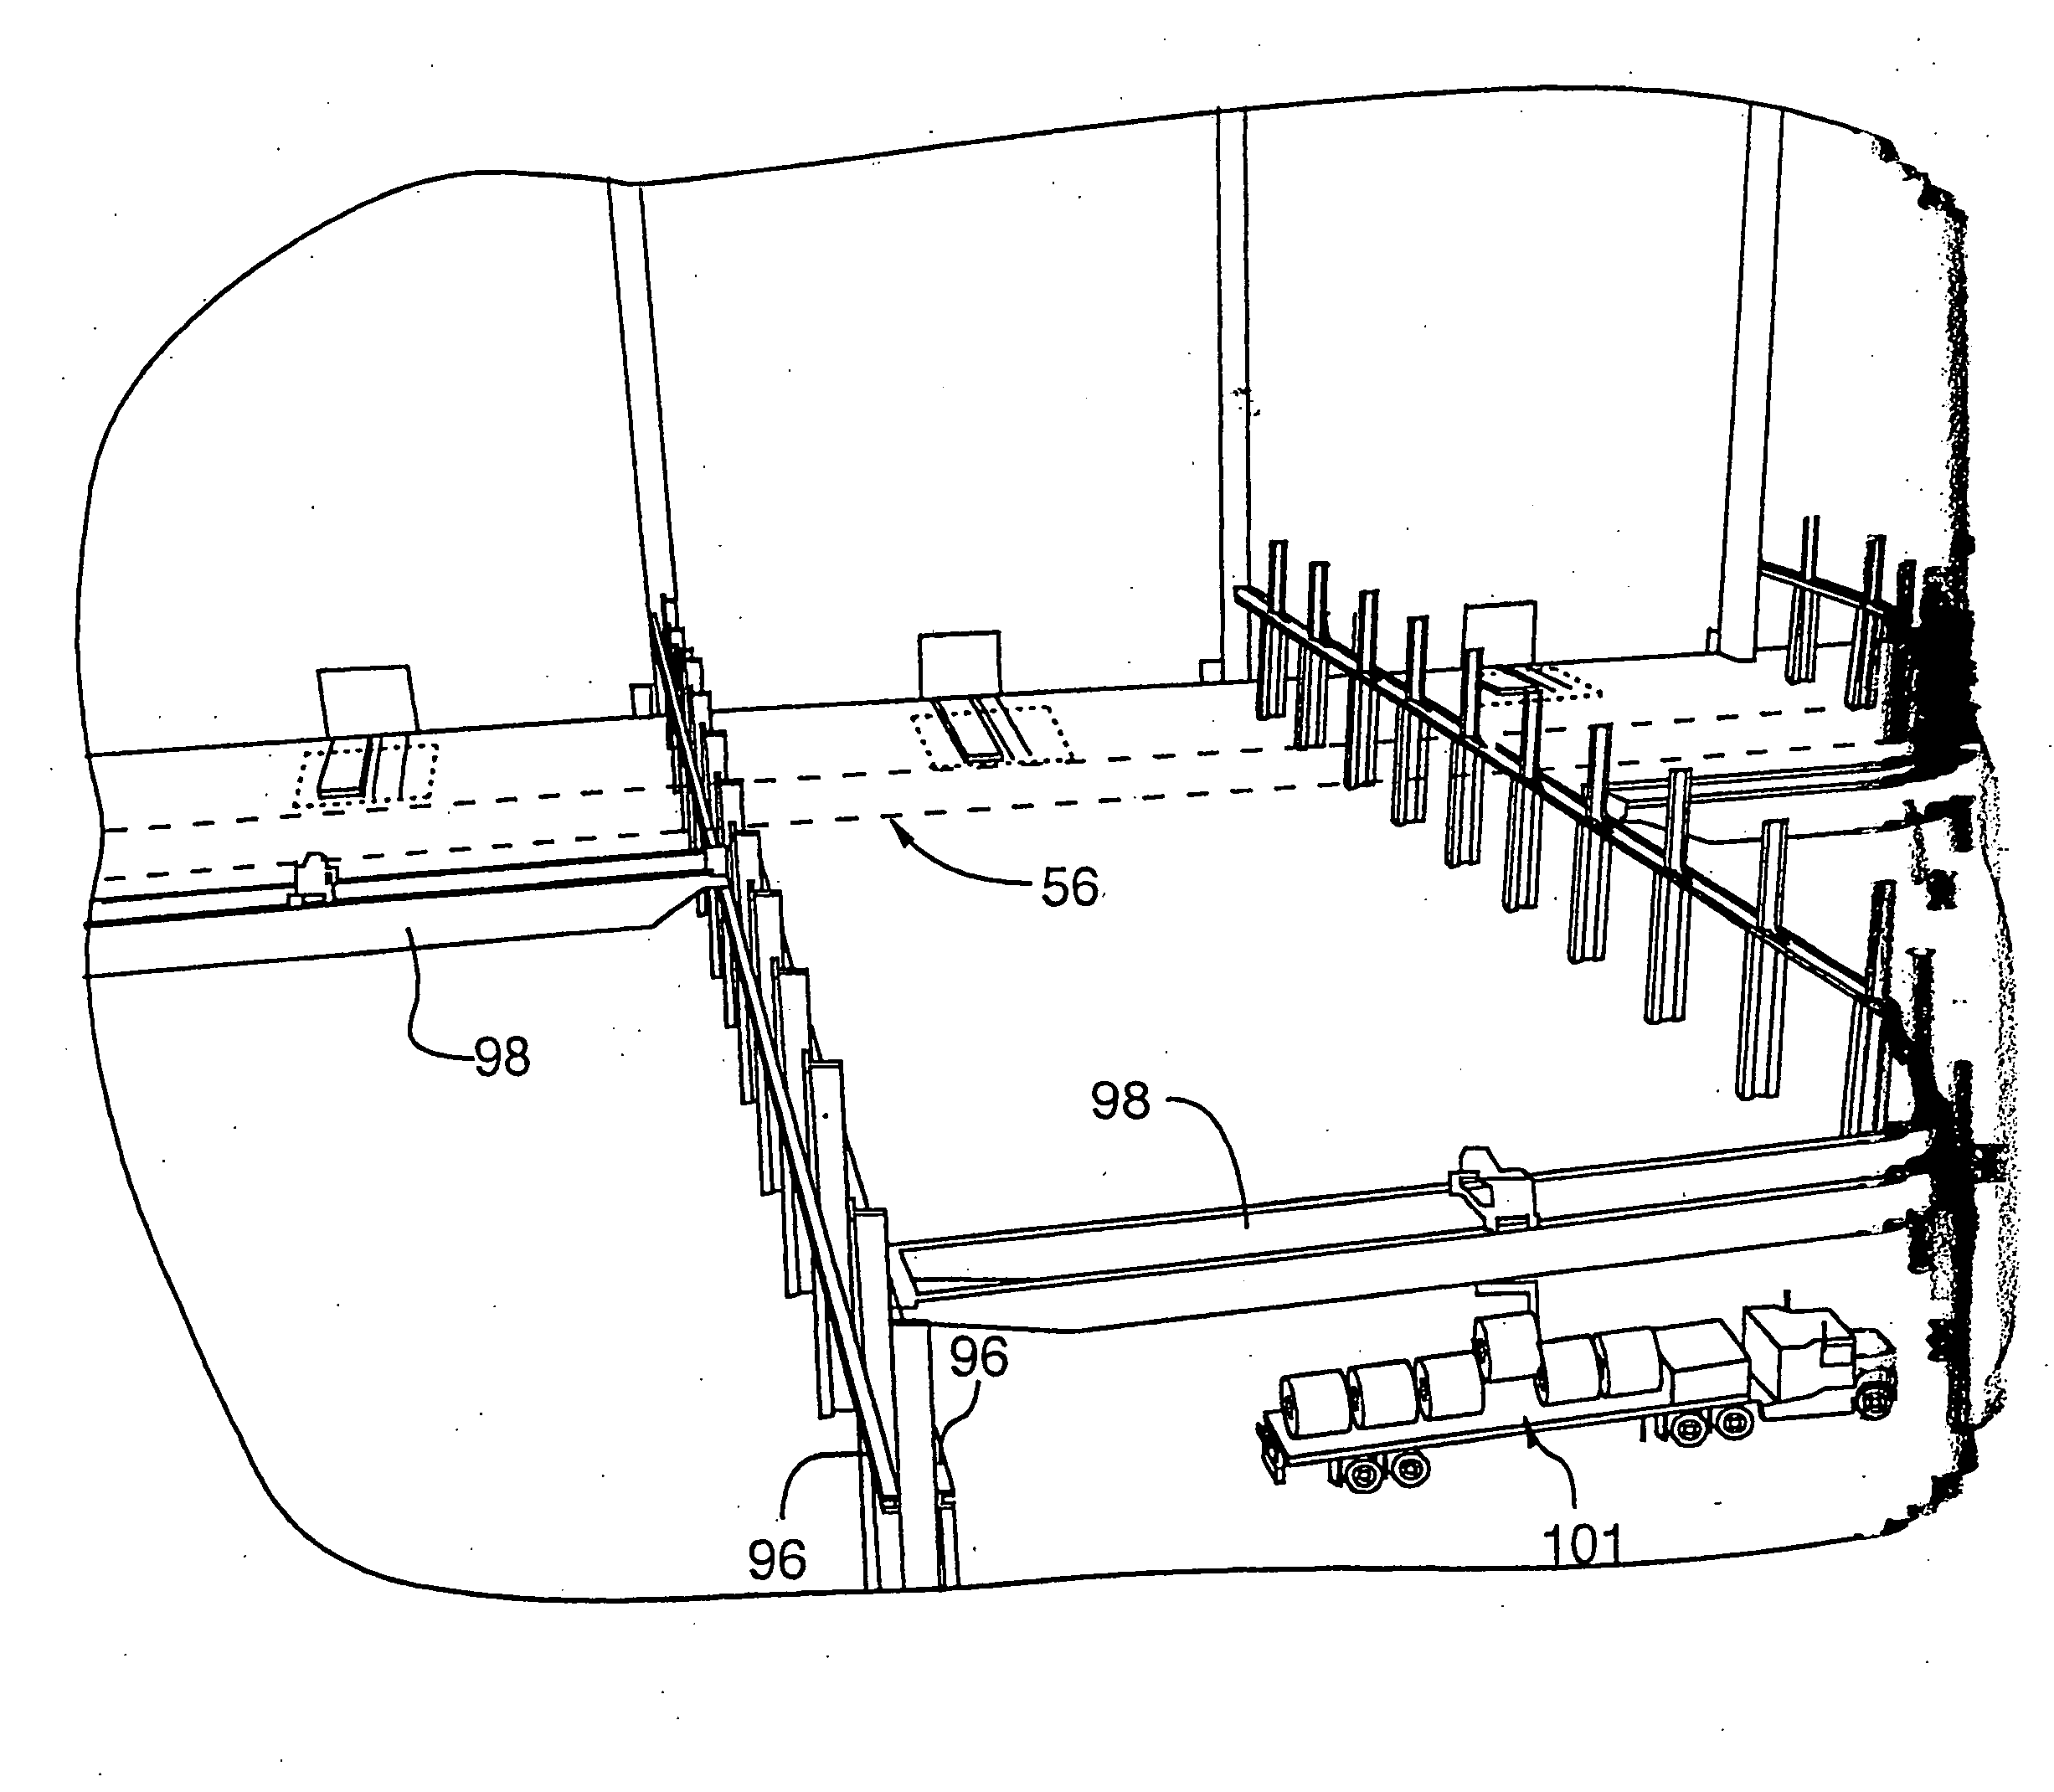 Process for handling cargo and cargo handling facility